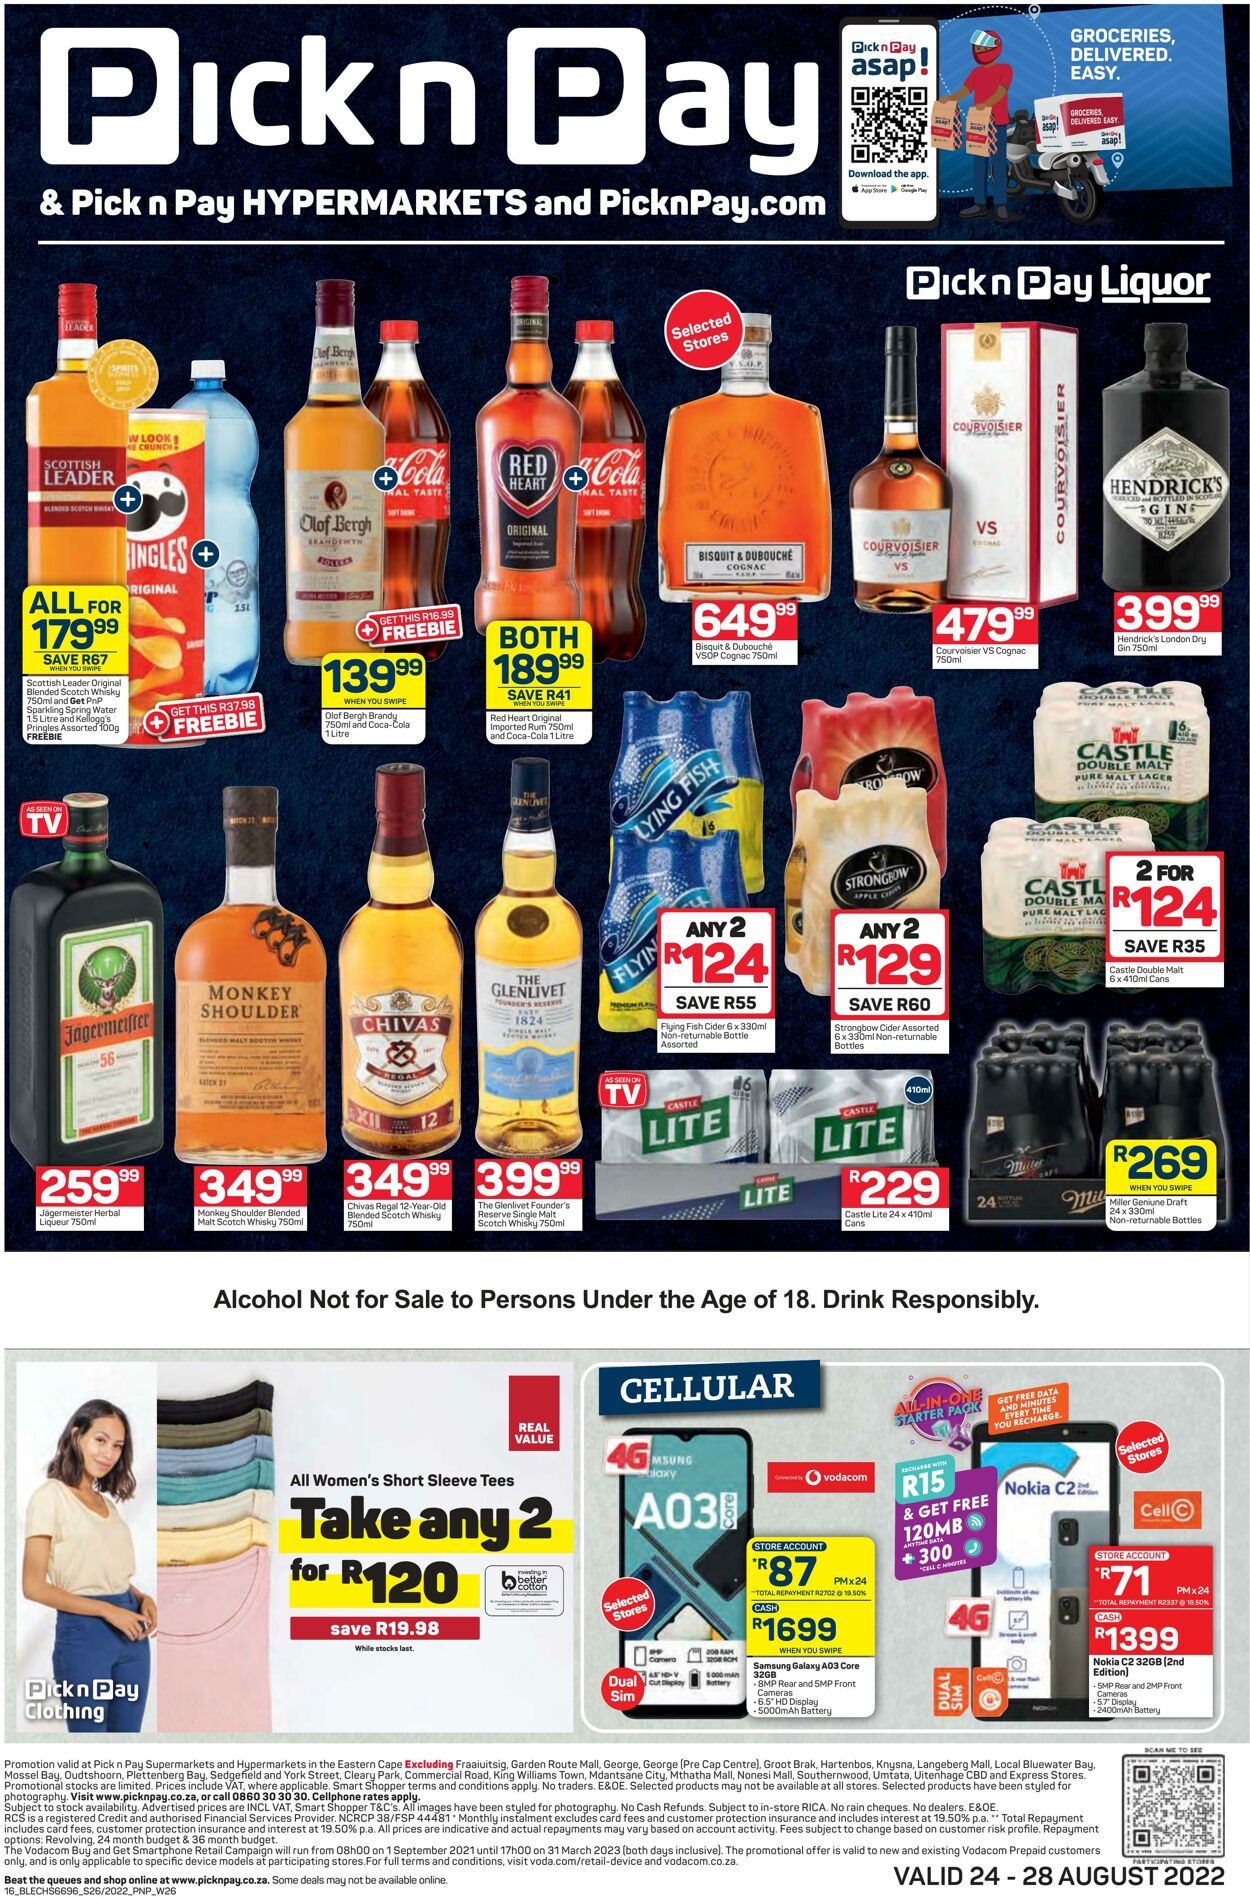 Pick n Pay Promotional Leaflet - Valid from 24.08 to 28.08 - Page nb 16 ...